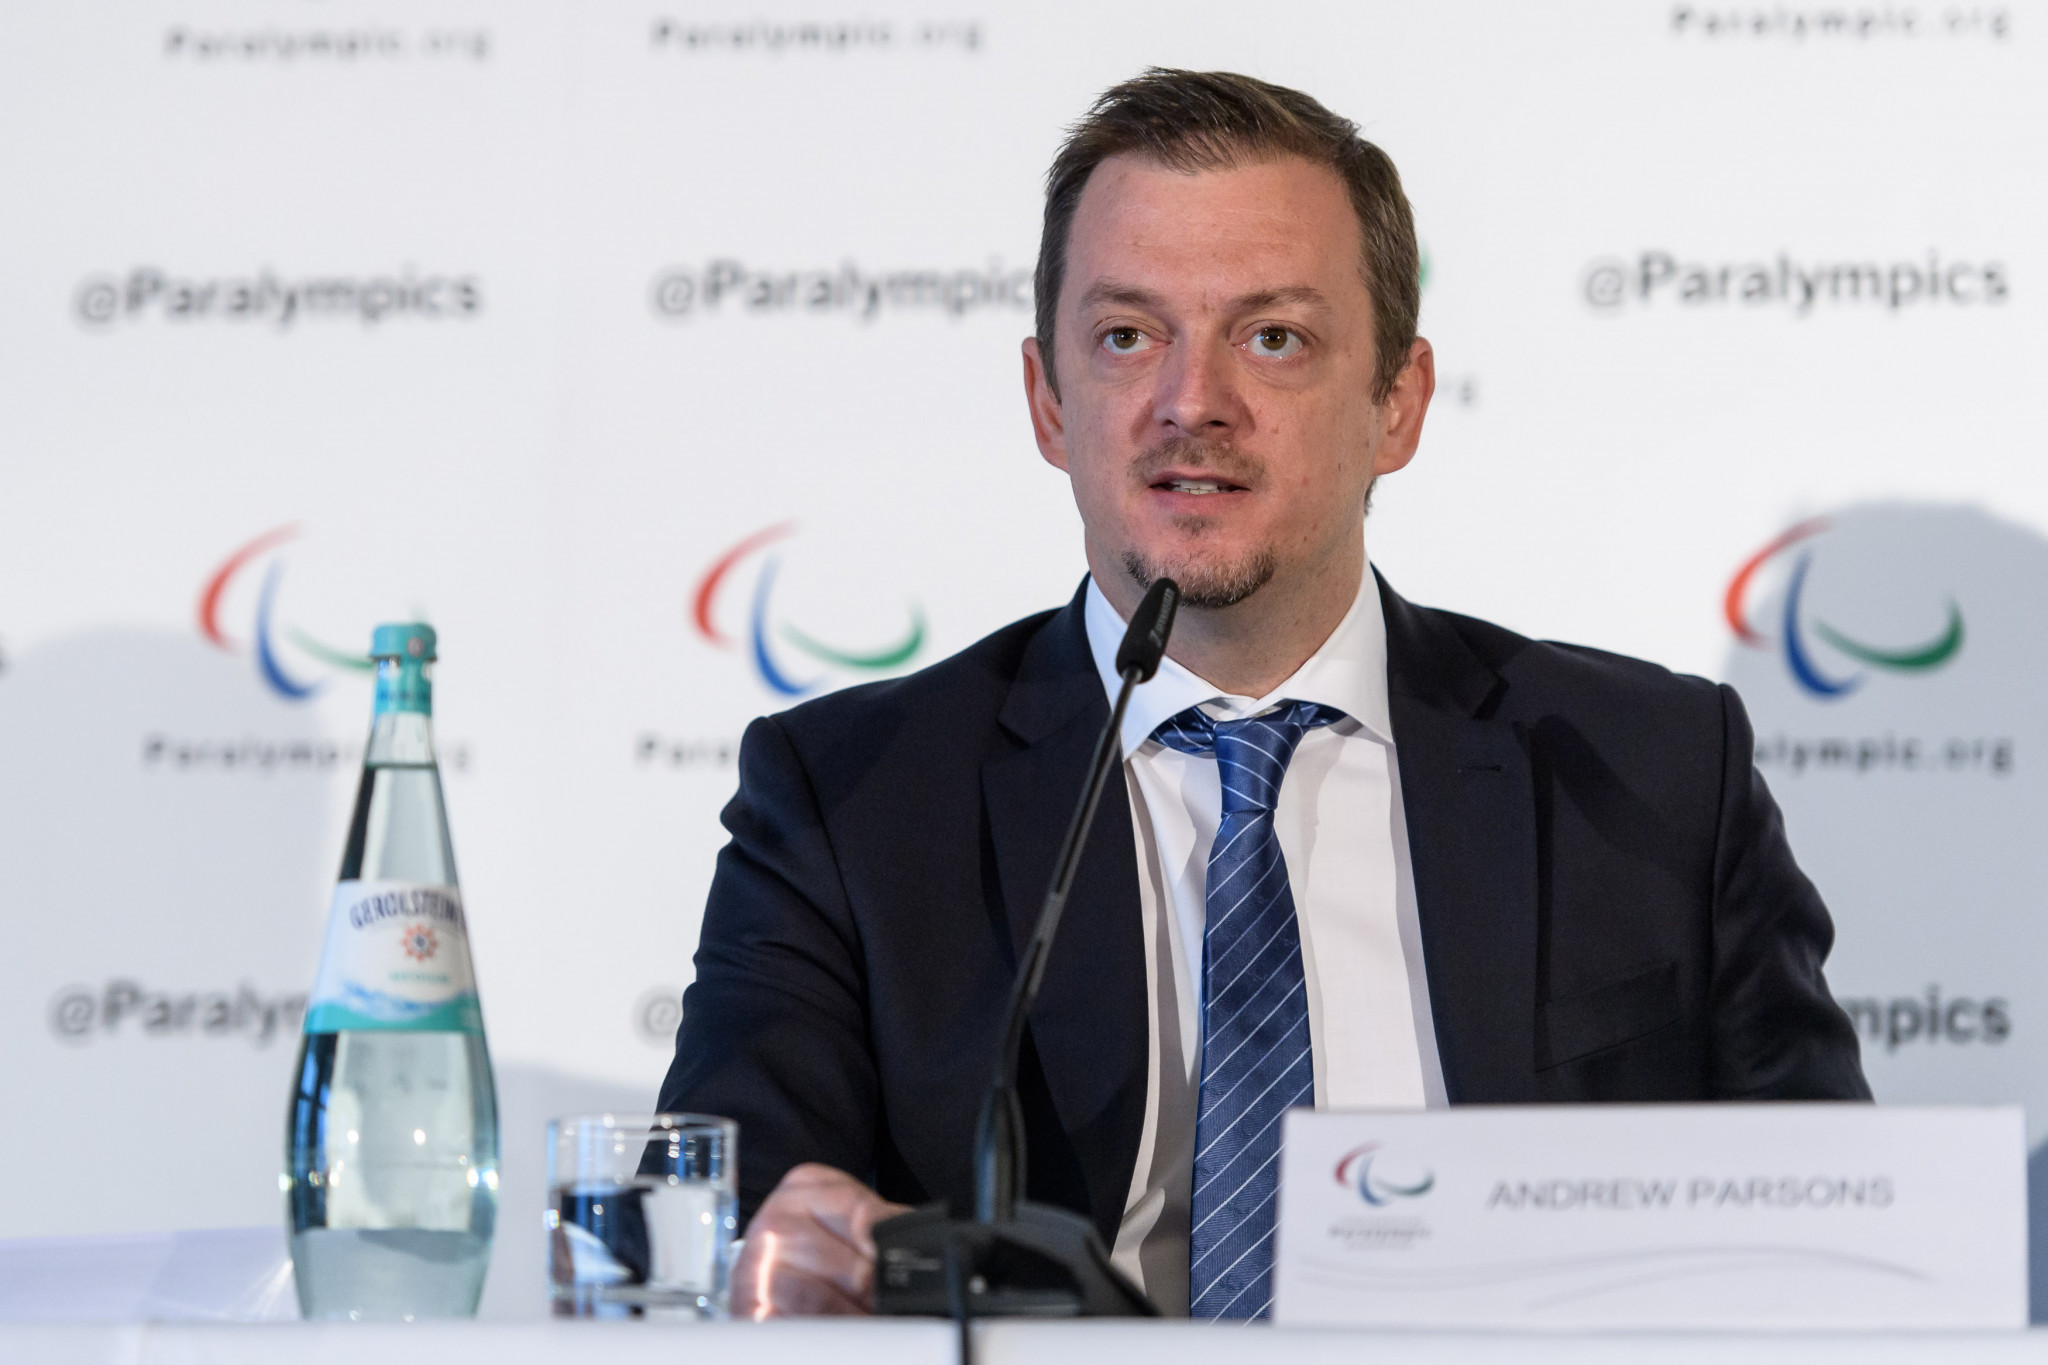 IPC President Andrew Parsons said his organisation was 